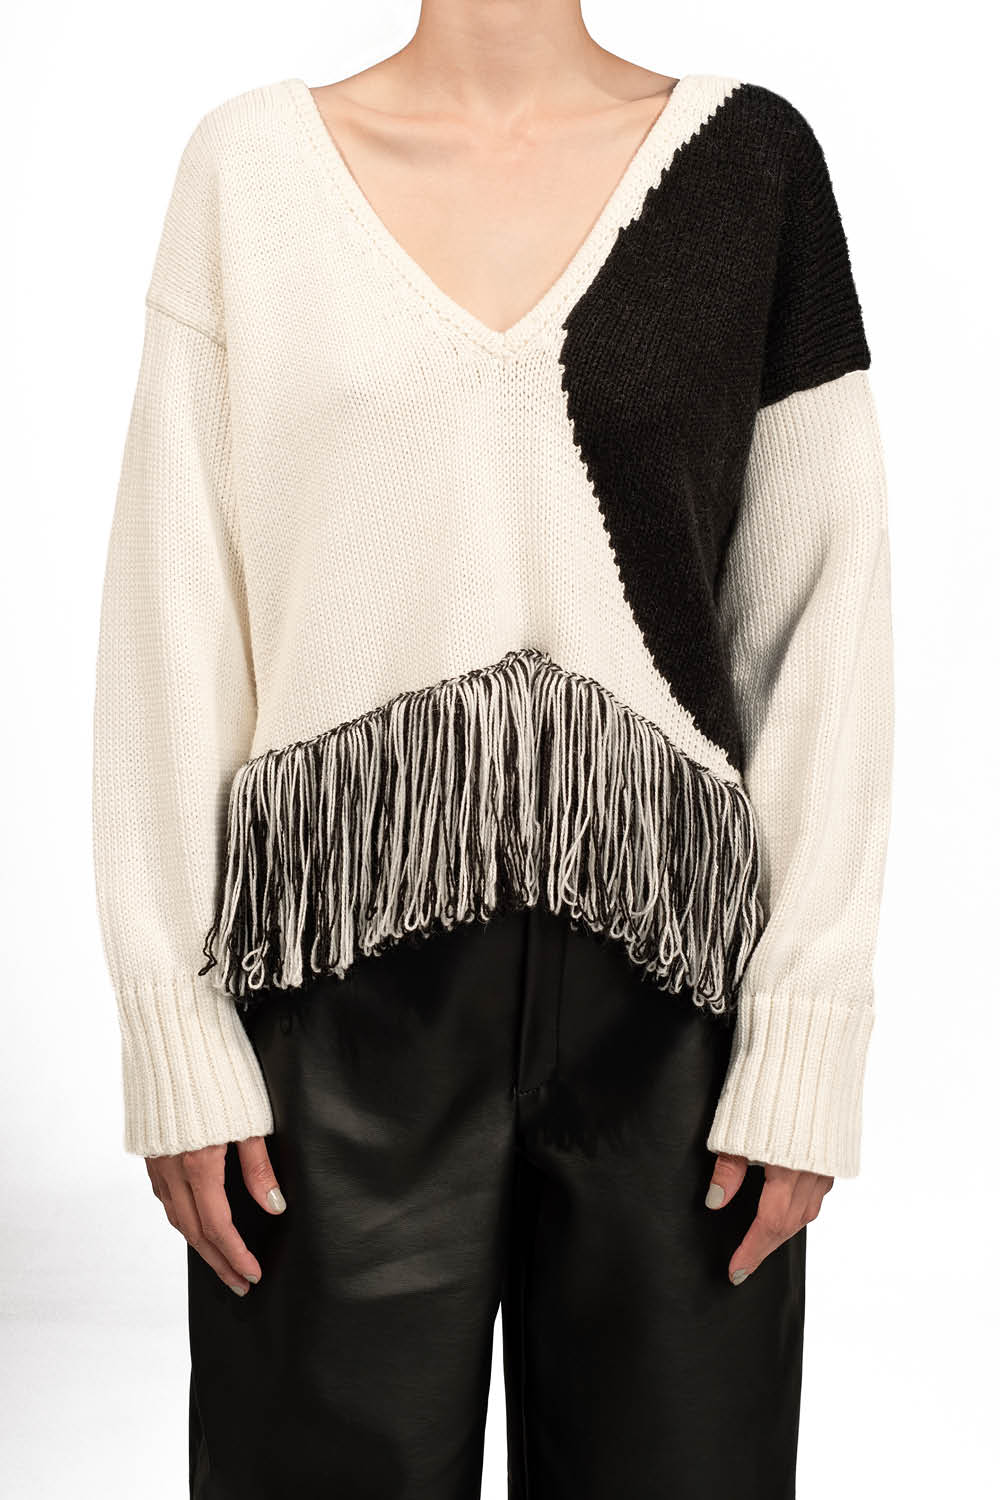 MOON ECLIPSE SWEATER IN IVORY/BLACK